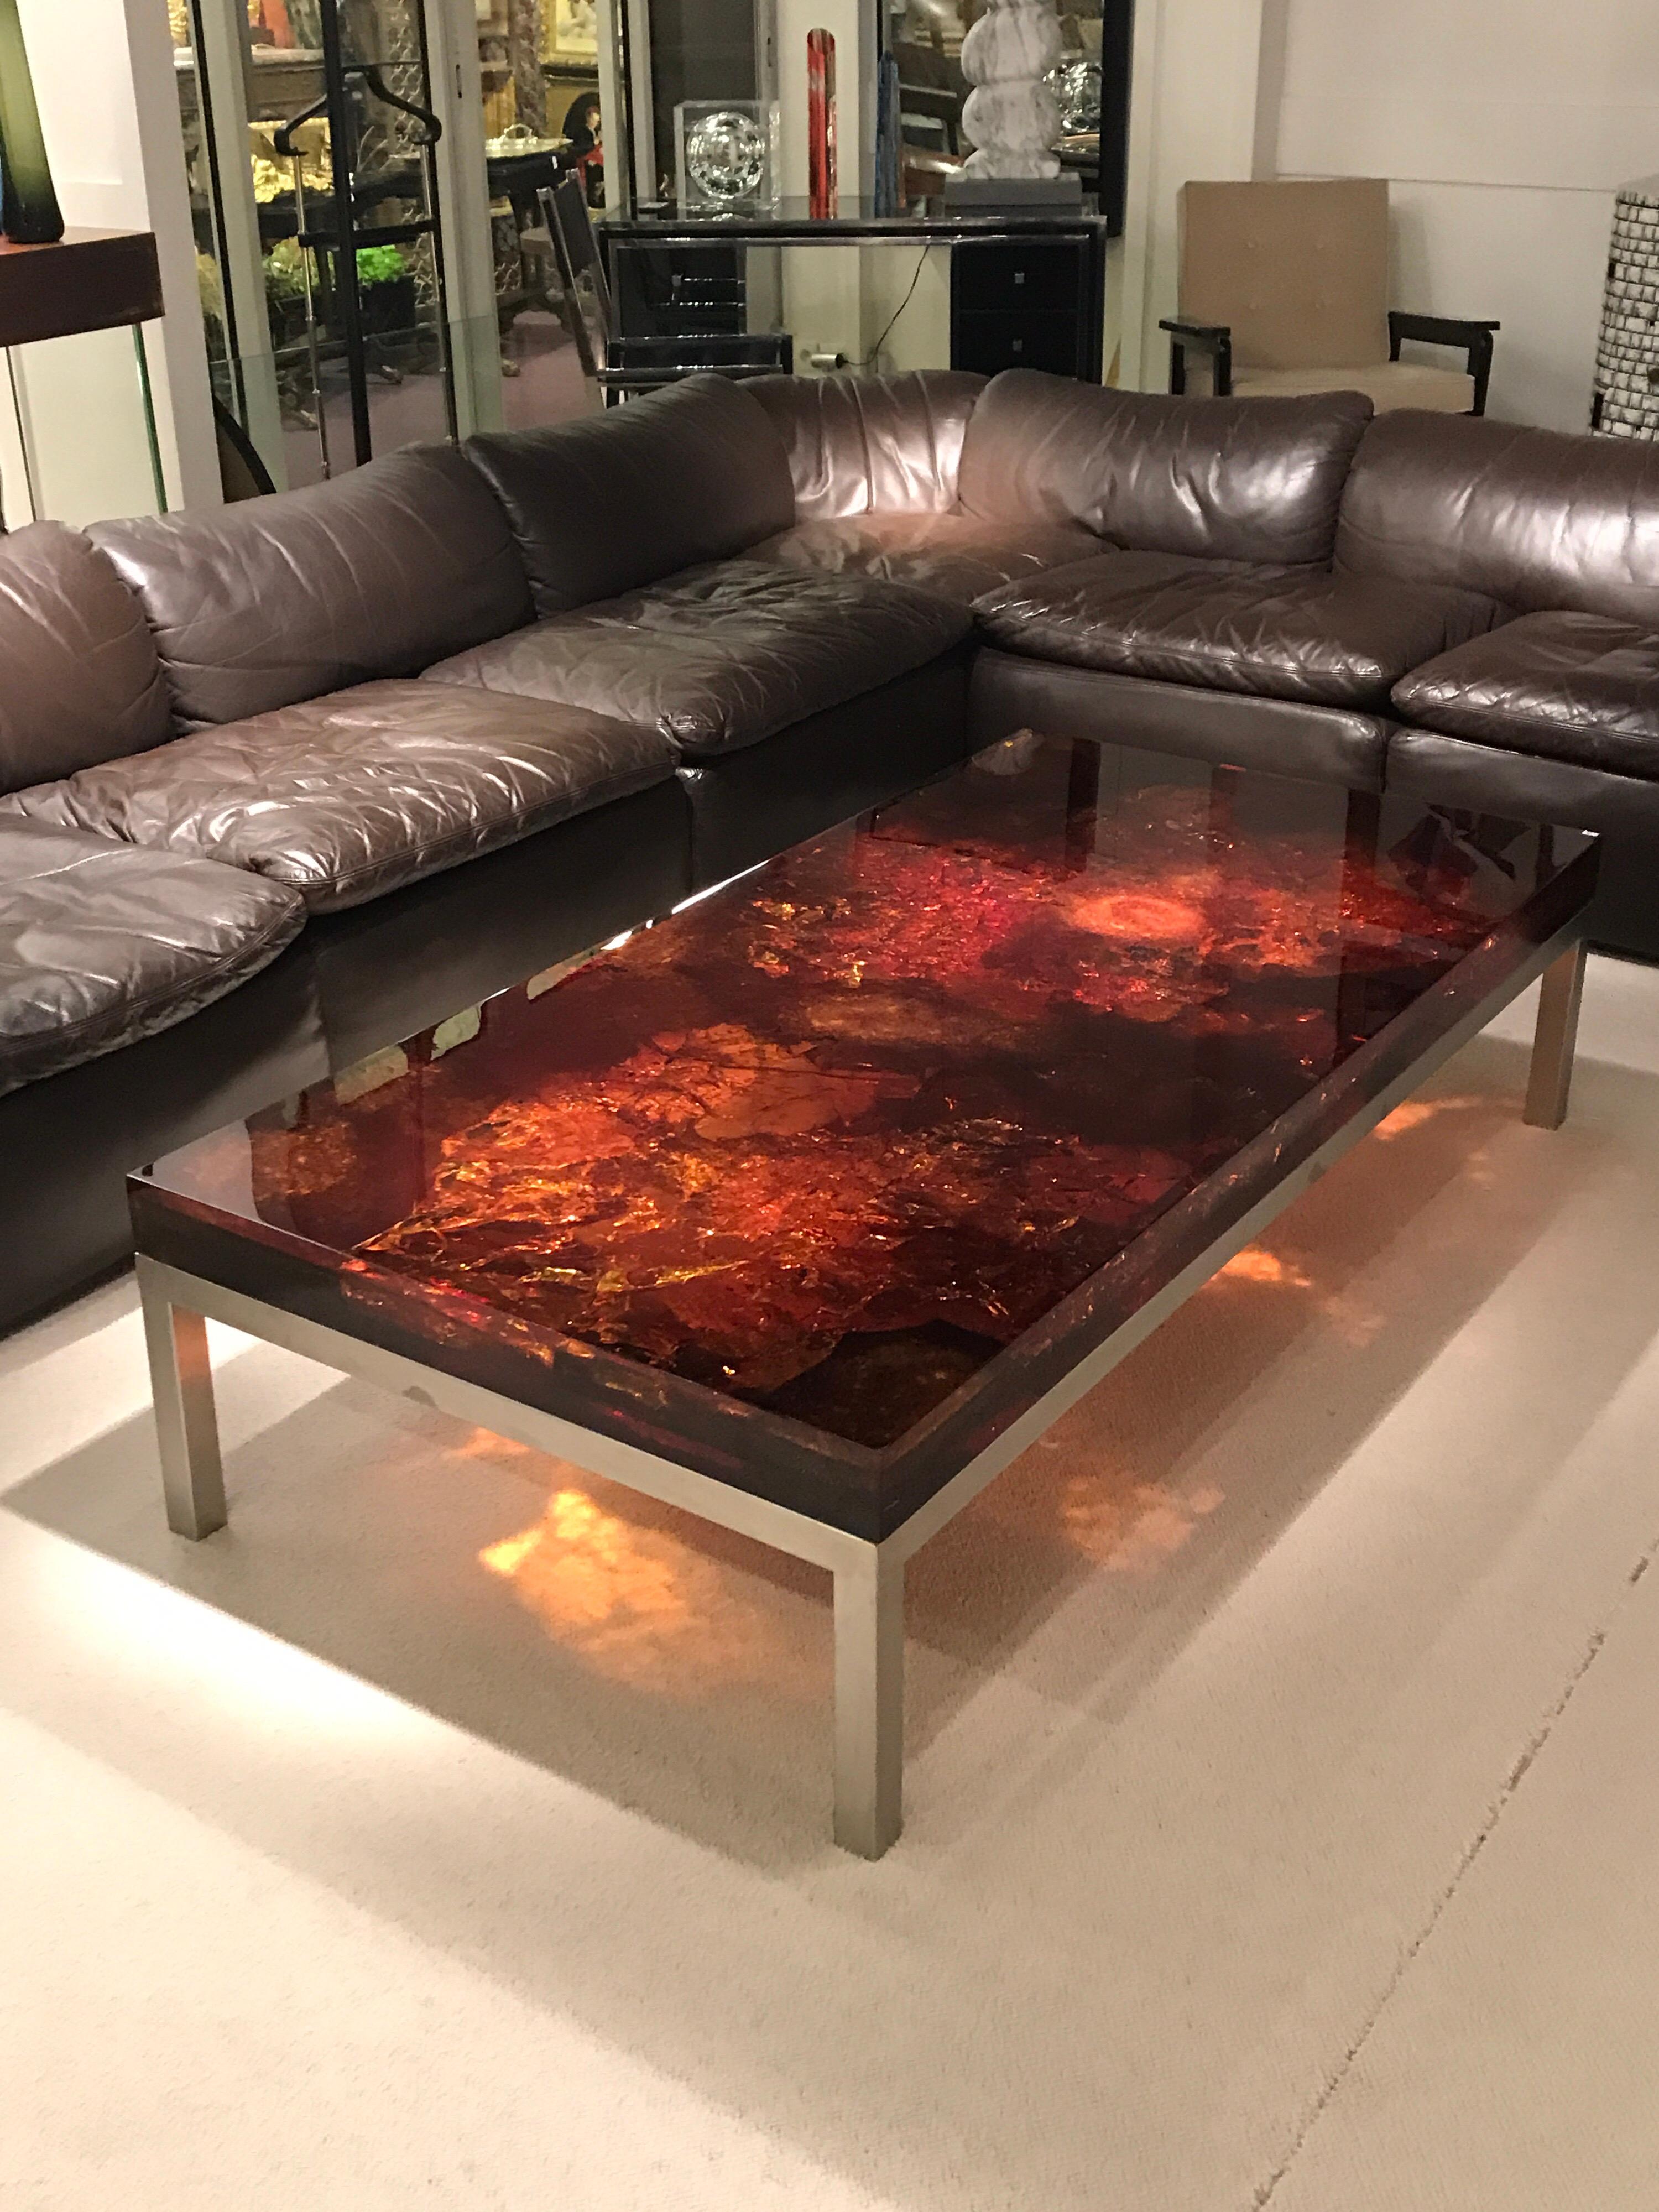 1970s resin fractal coffee table by Marie-Claude de Fouquieres.
Table feet is in stainless steel
Resin looks like amber.
Good vintage condition

Fouquieres Marie-Claude
A wife of a major plastic manufacturer, Marie-Claude de Fouquieres made